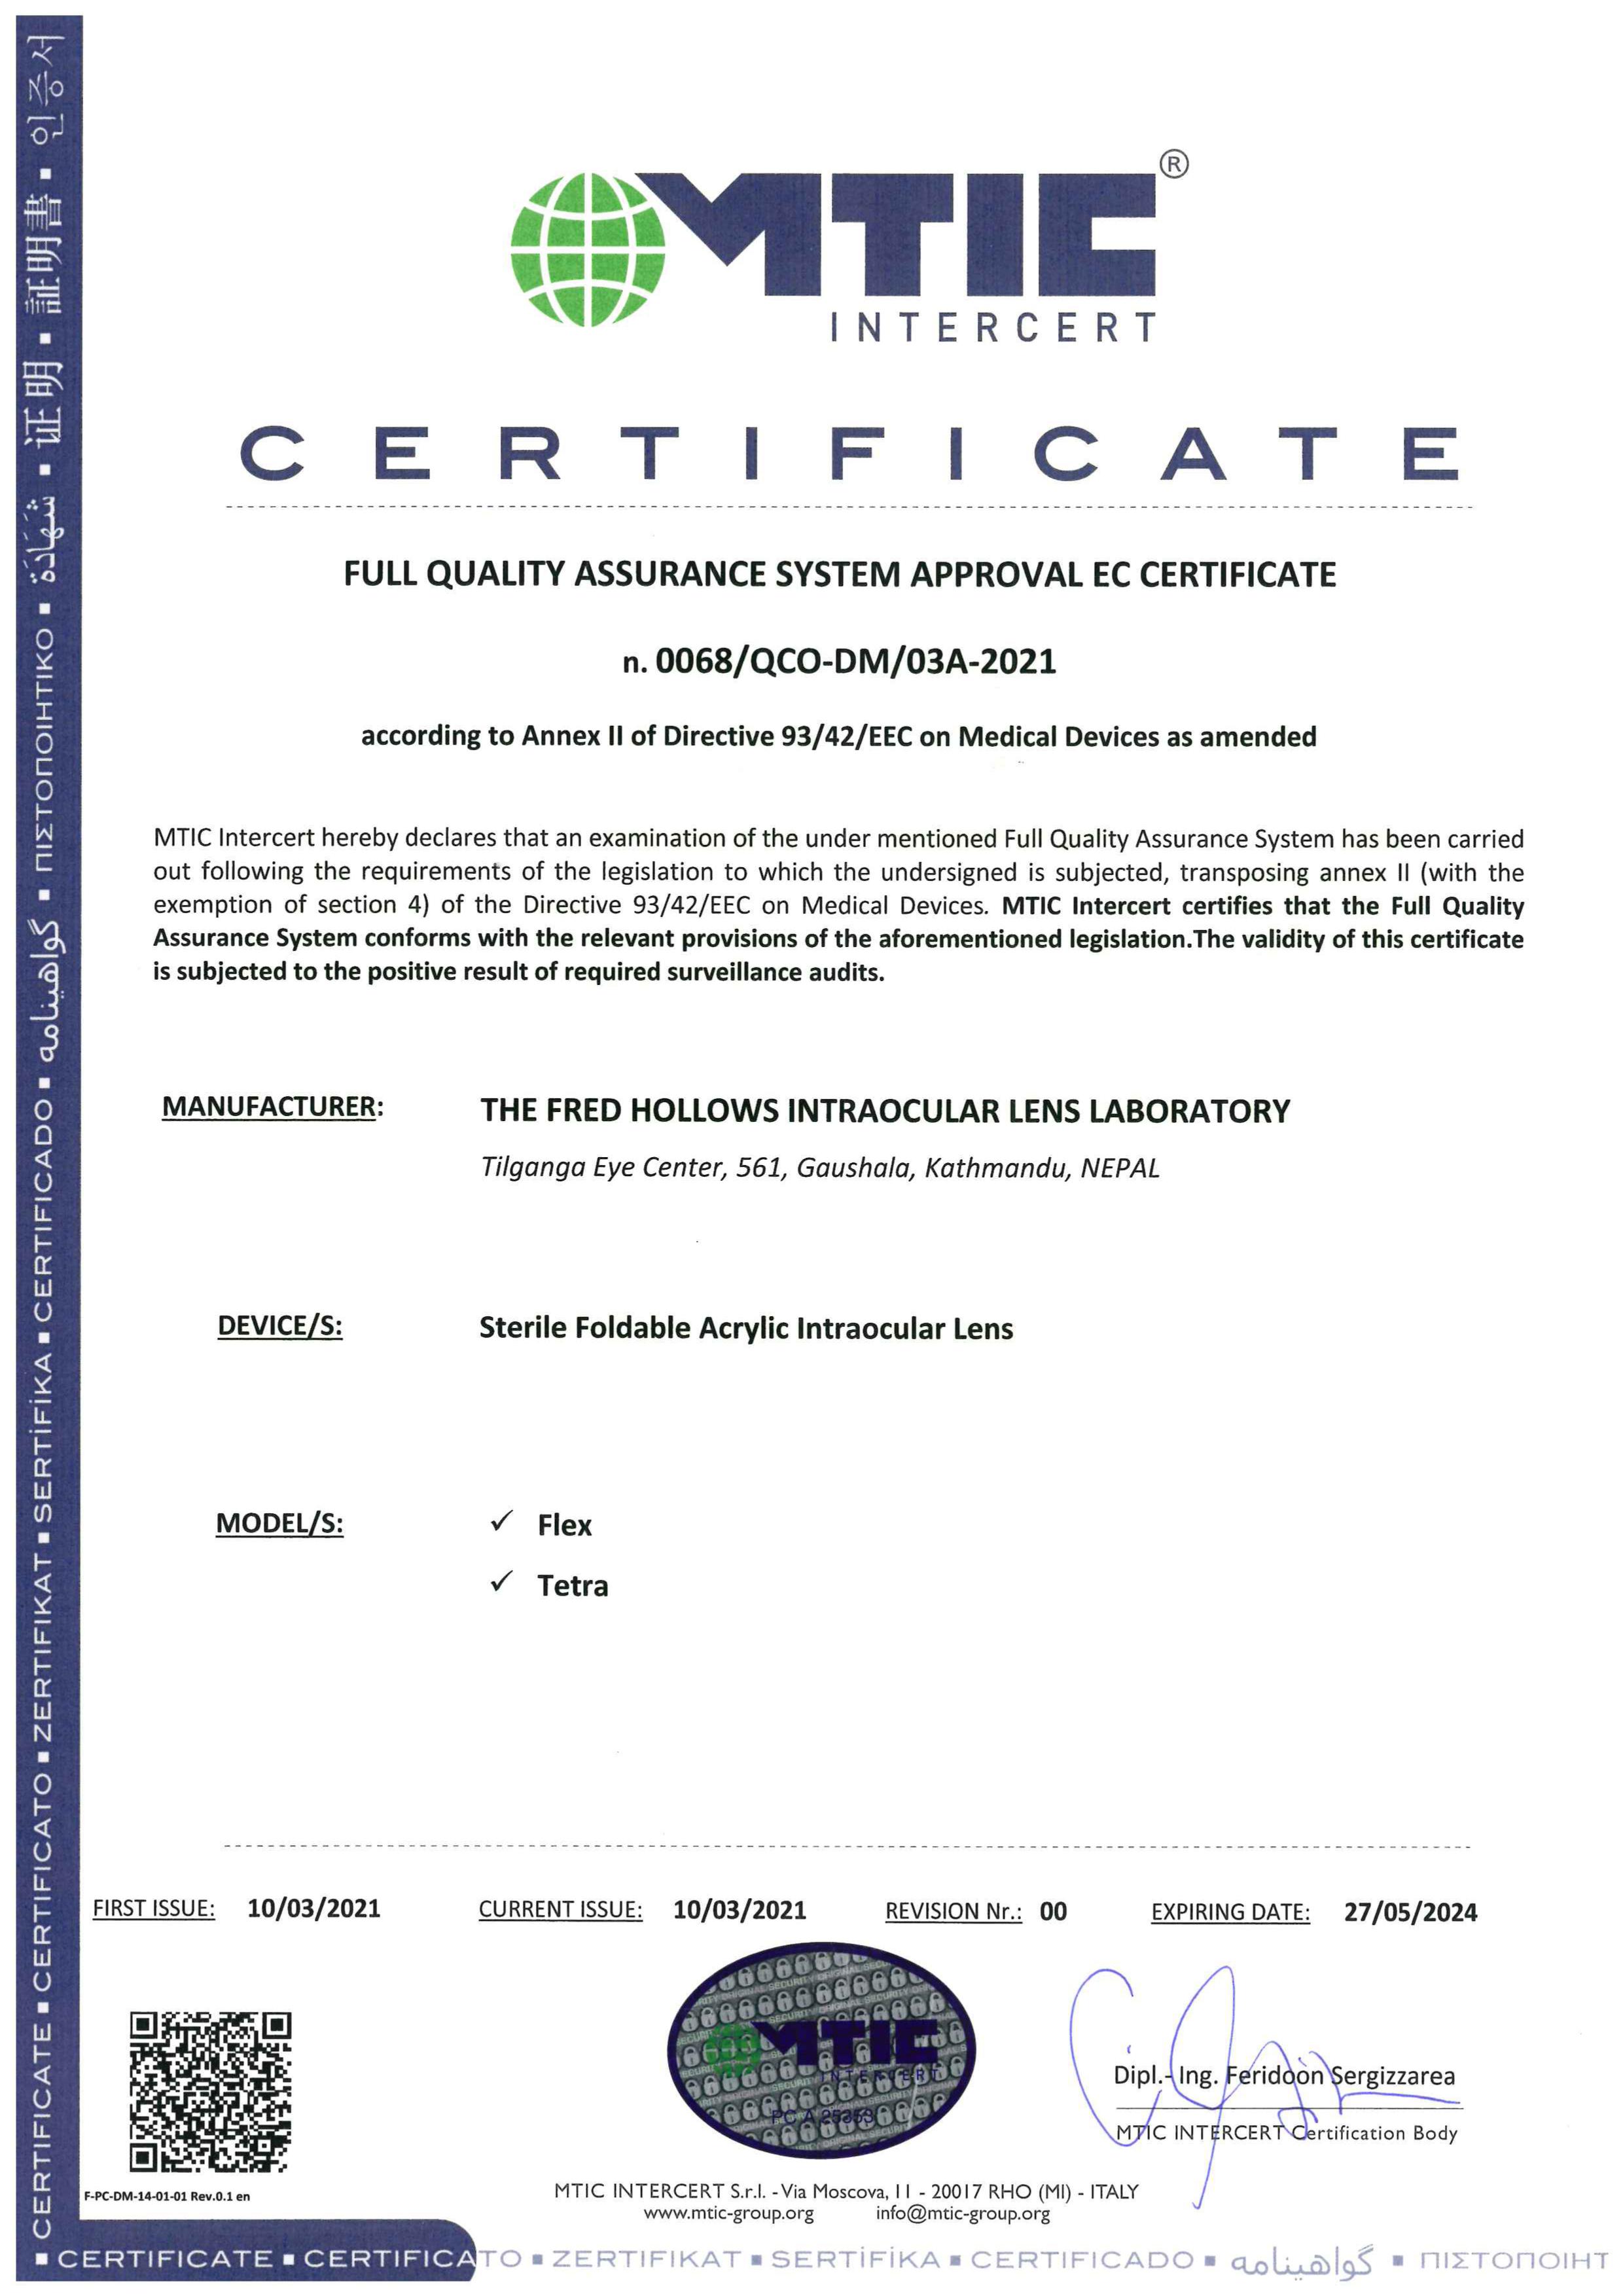 Tilganga IOL products has been received CE Certification from MTIC, Italy.